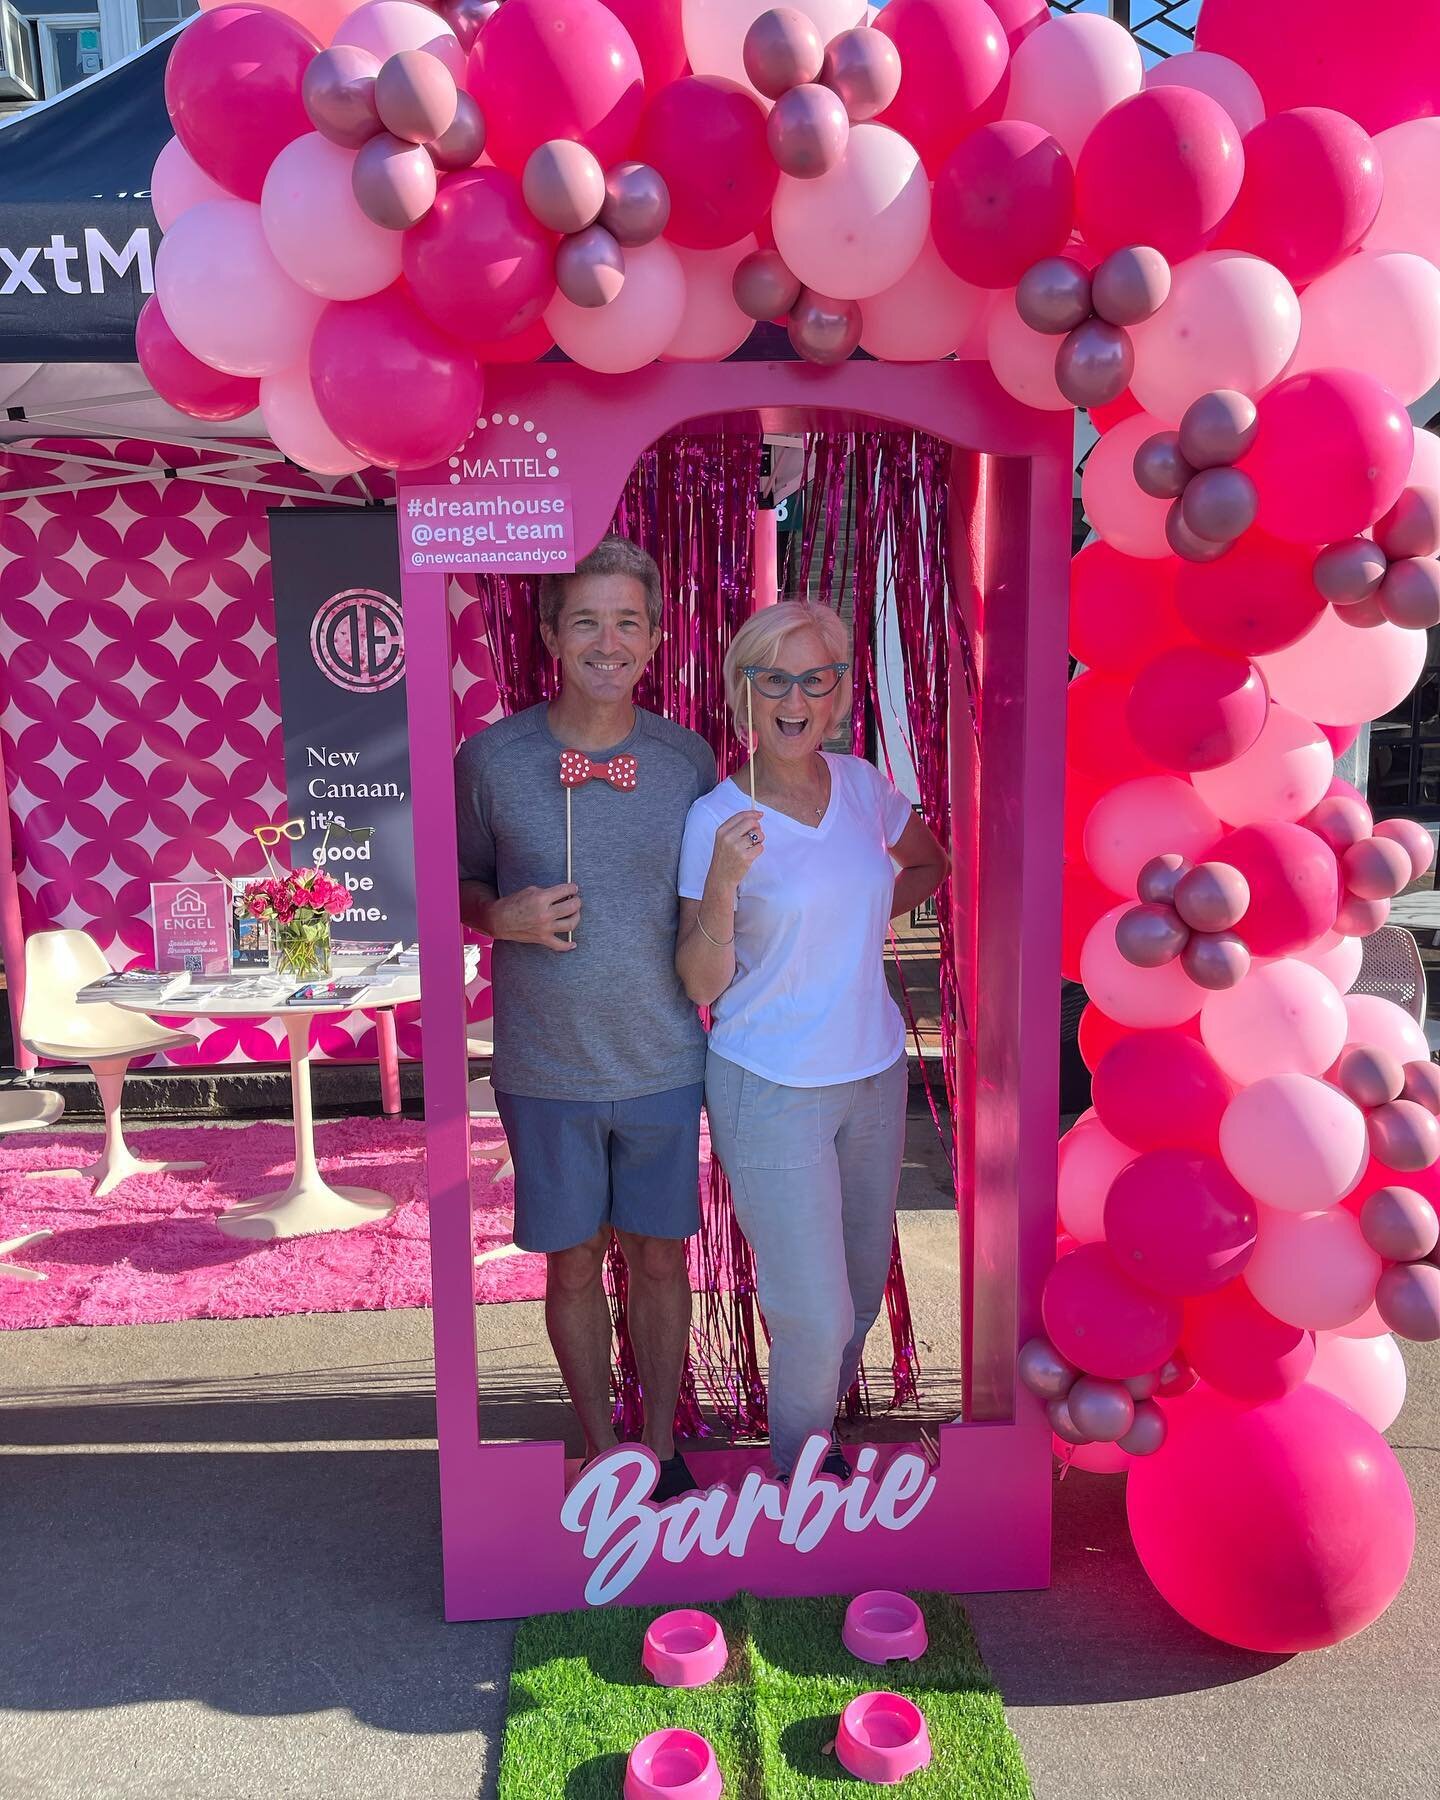 We sell Dream Houses!  Join us in the Barbie Dreamhouse at the New Canaan sidewalk sale today 9-4. Take a picture in our Barbie booth and register to win the Barbie Candy Tower from @newcanaancandyco 

@douglaselliman @douglasellimanconnecticut #elli